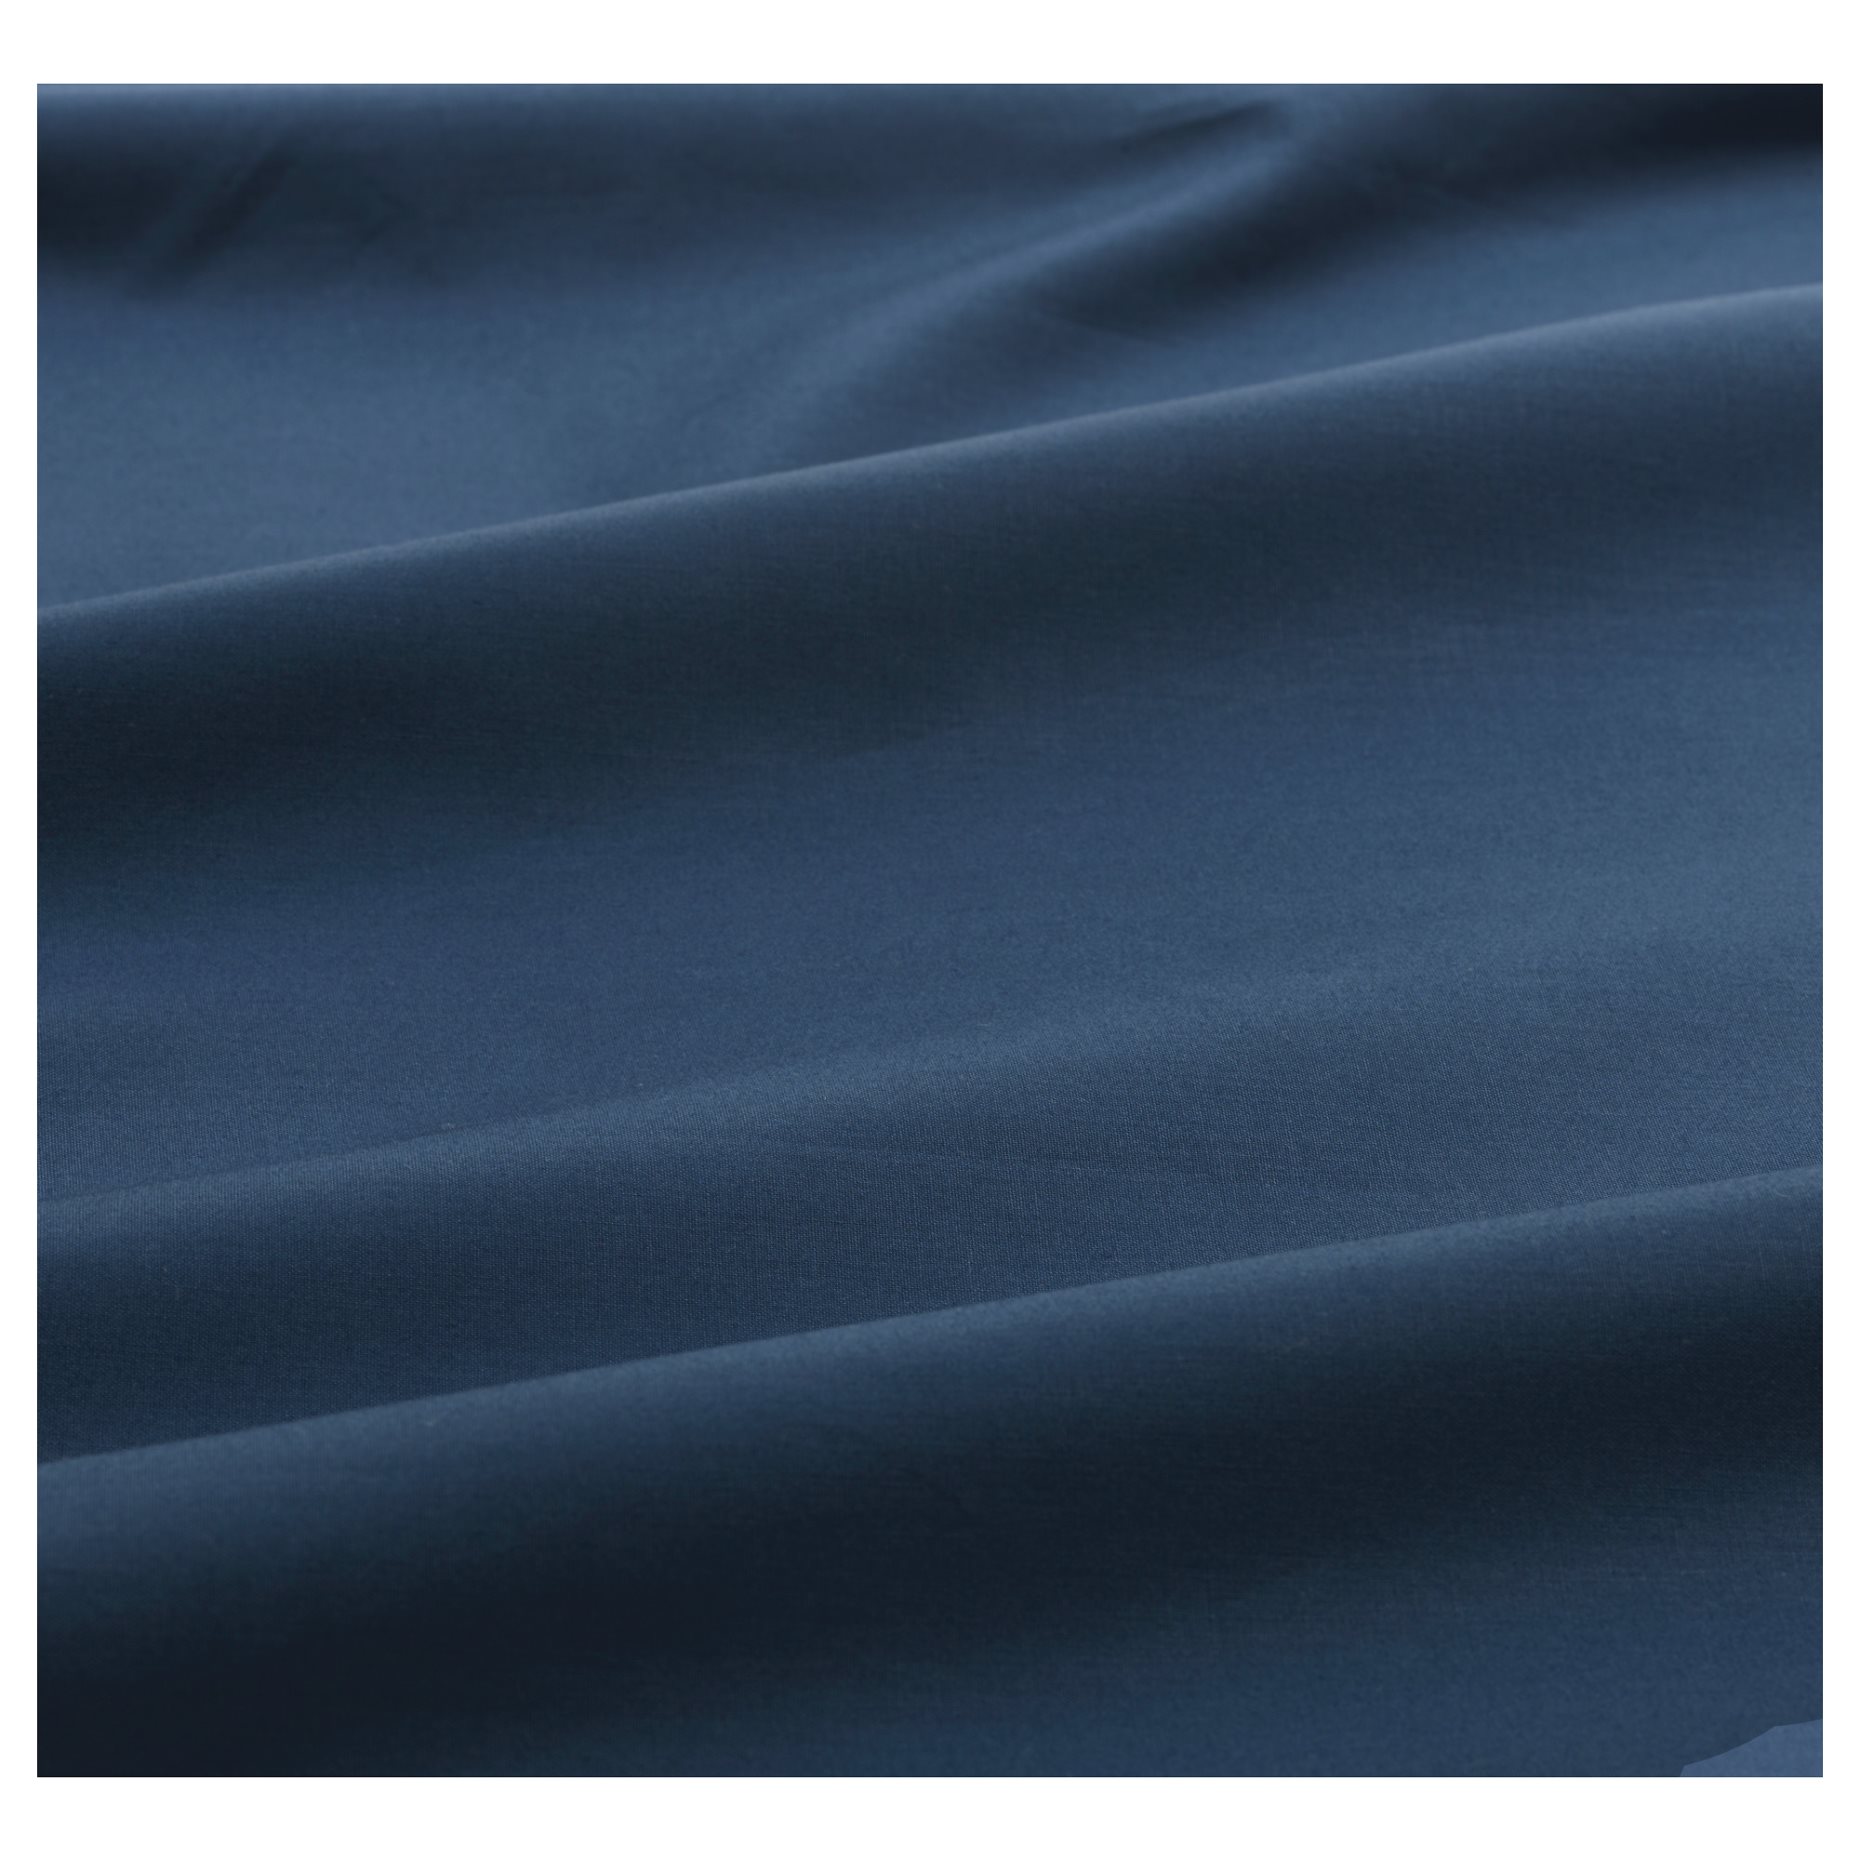 ULLVIDE, fitted sheet, 903.369.51